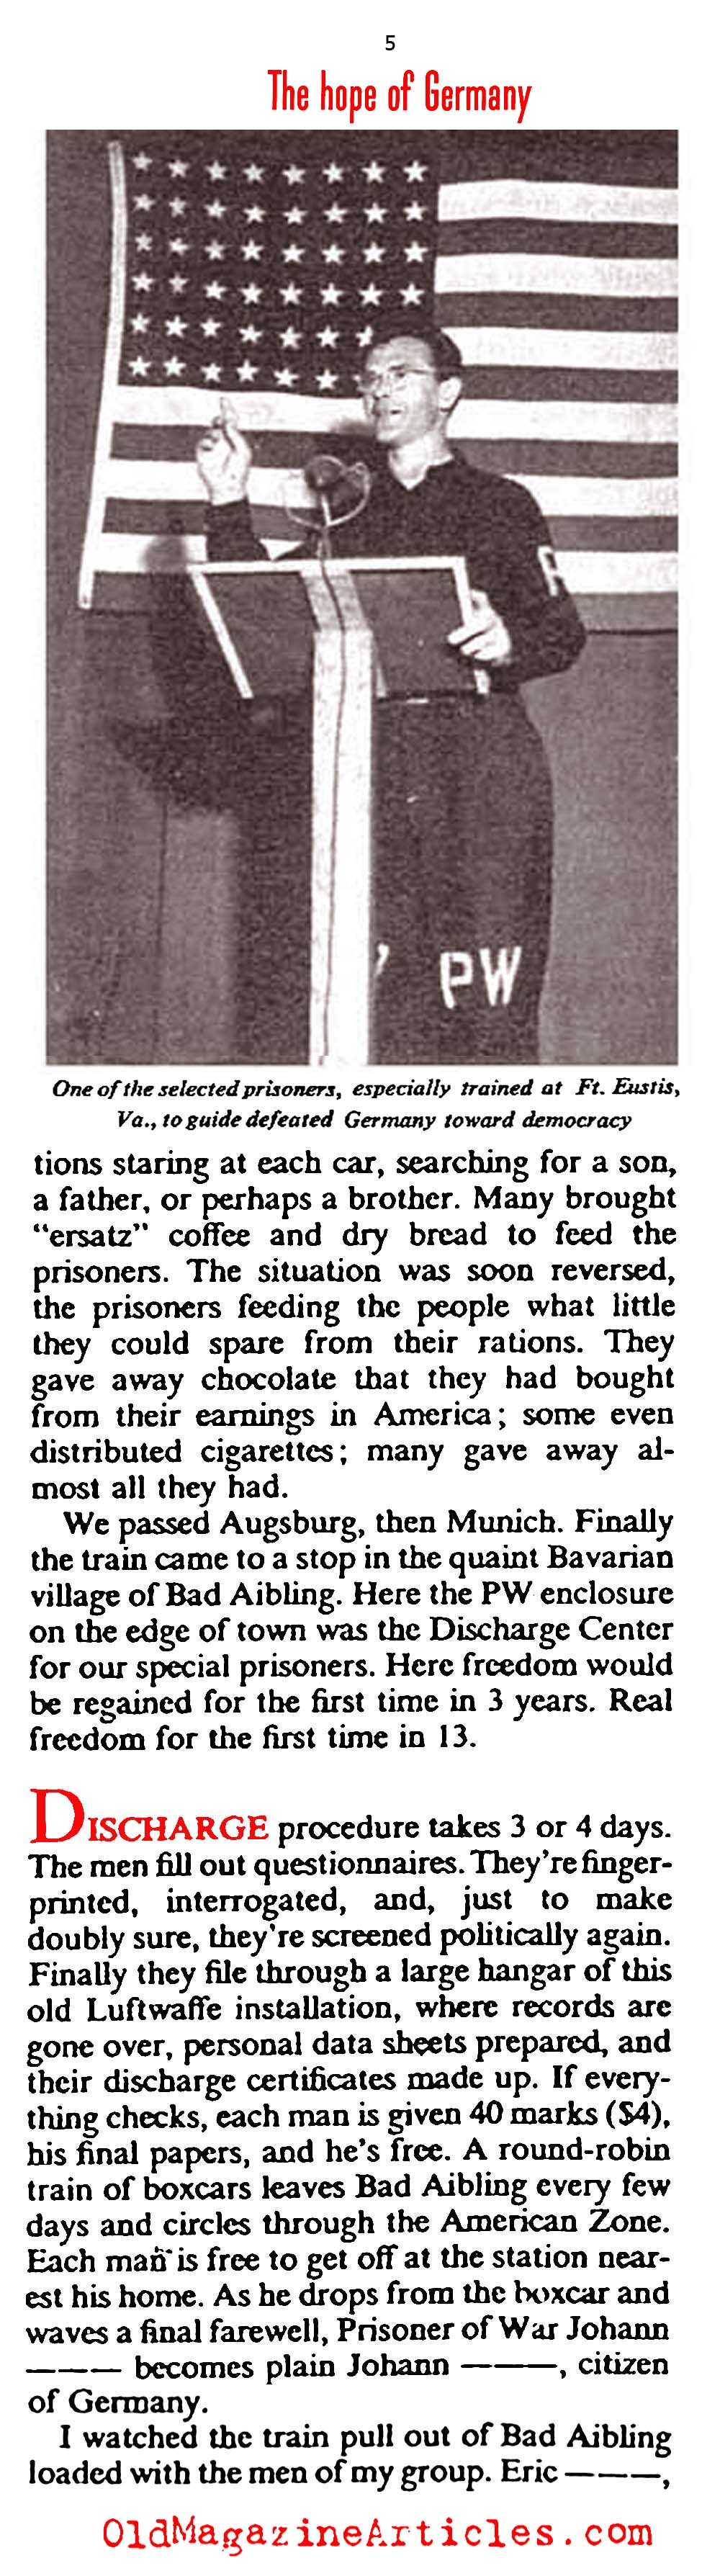 The Re-Education of German Prisoners of War (The American Magazine, 1946)